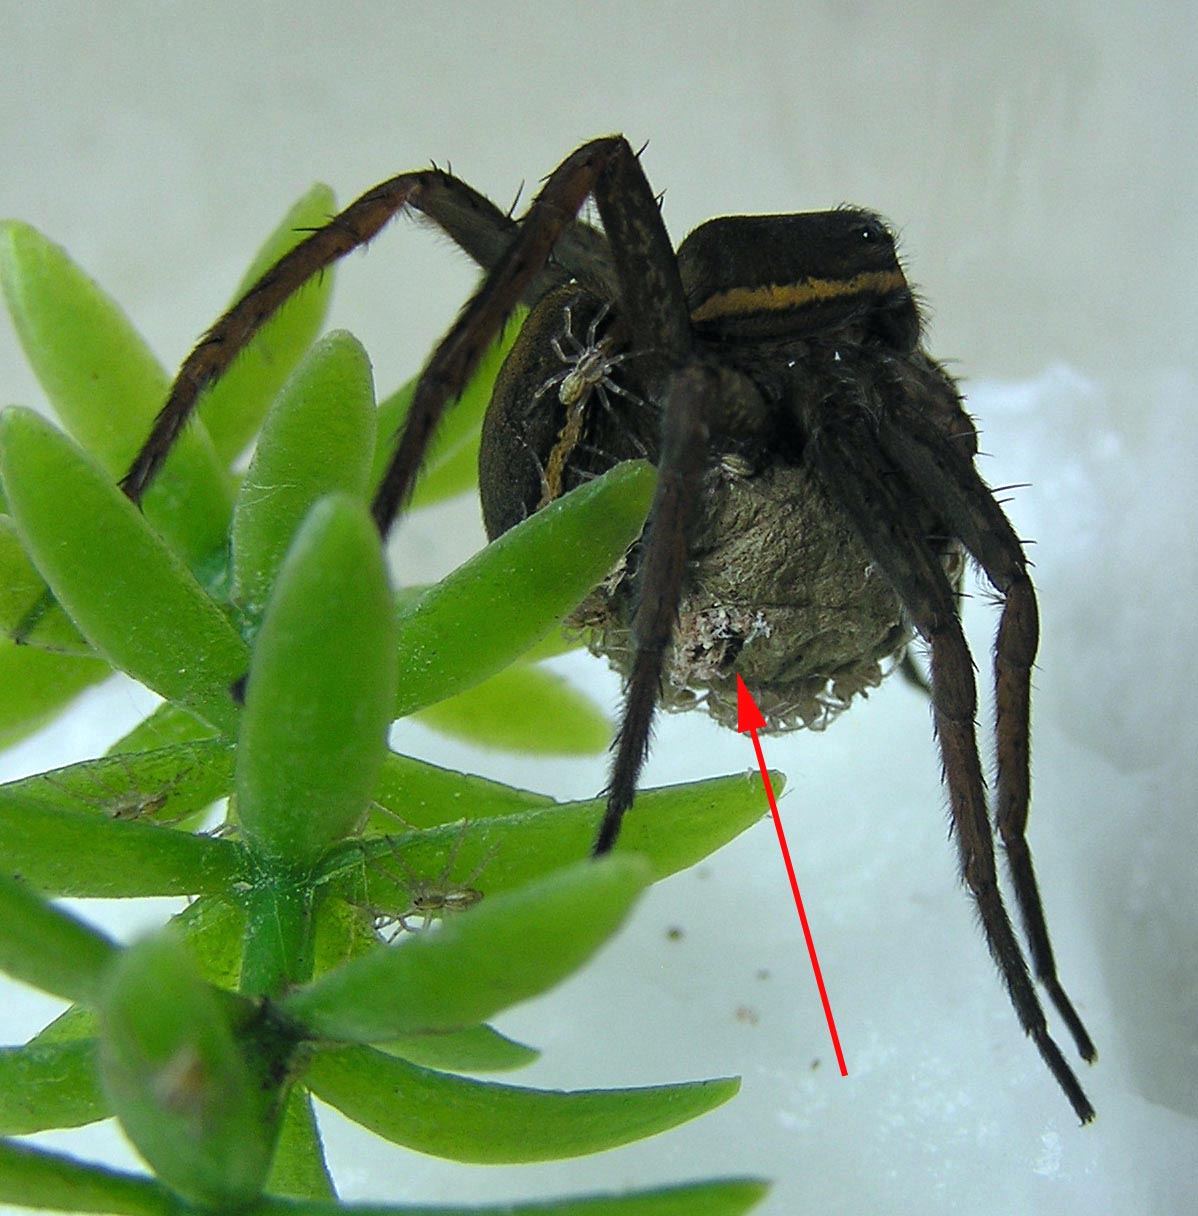 Dolmedes plantarius egg sac with spiderlings starting to emerge (in captivity, under license)